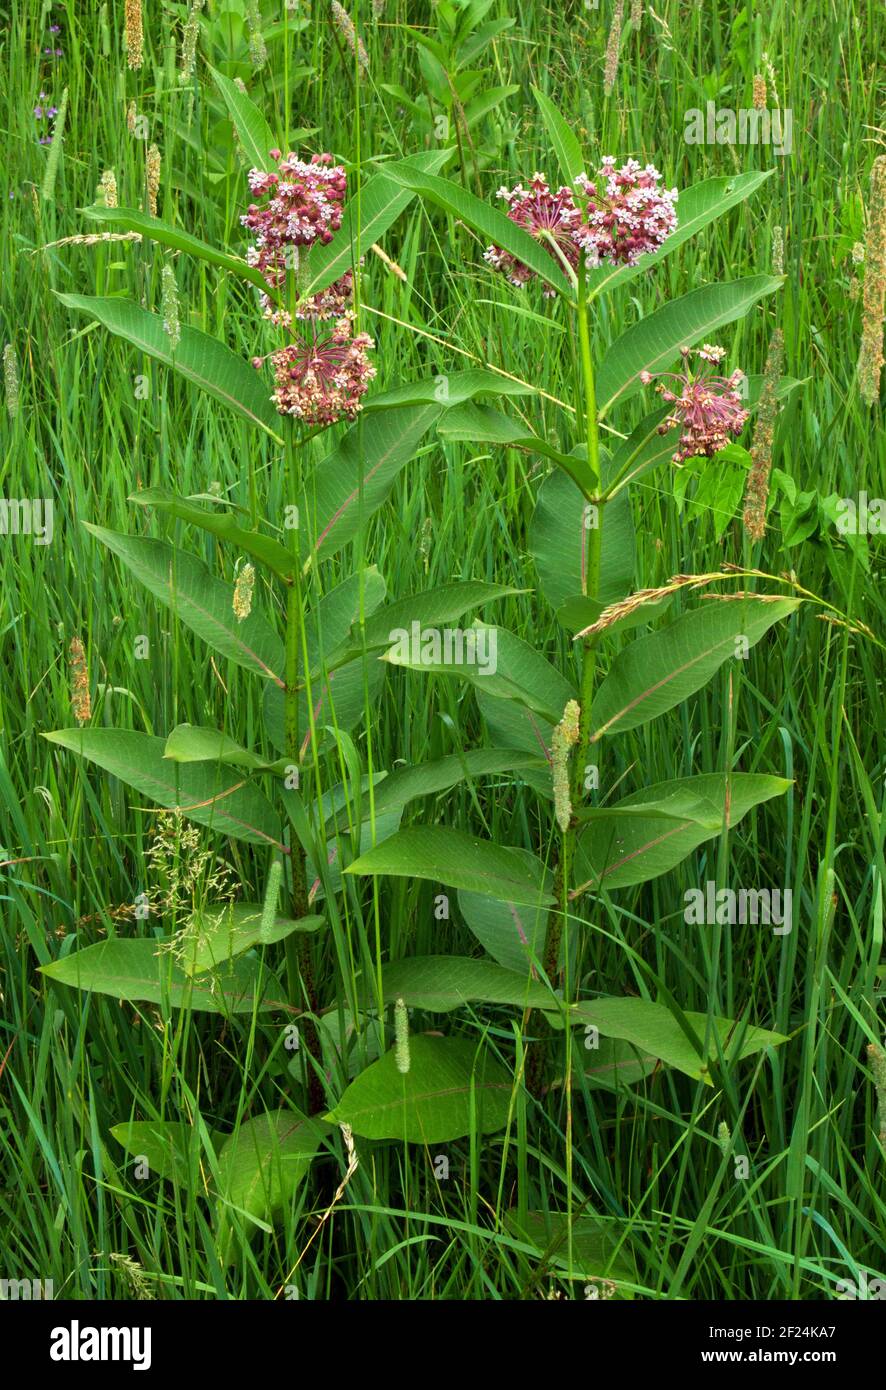 Common Milkweed is fould in meadows, roadsides, and old field.  It is a very important for Monarch butterflies. Stock Photo